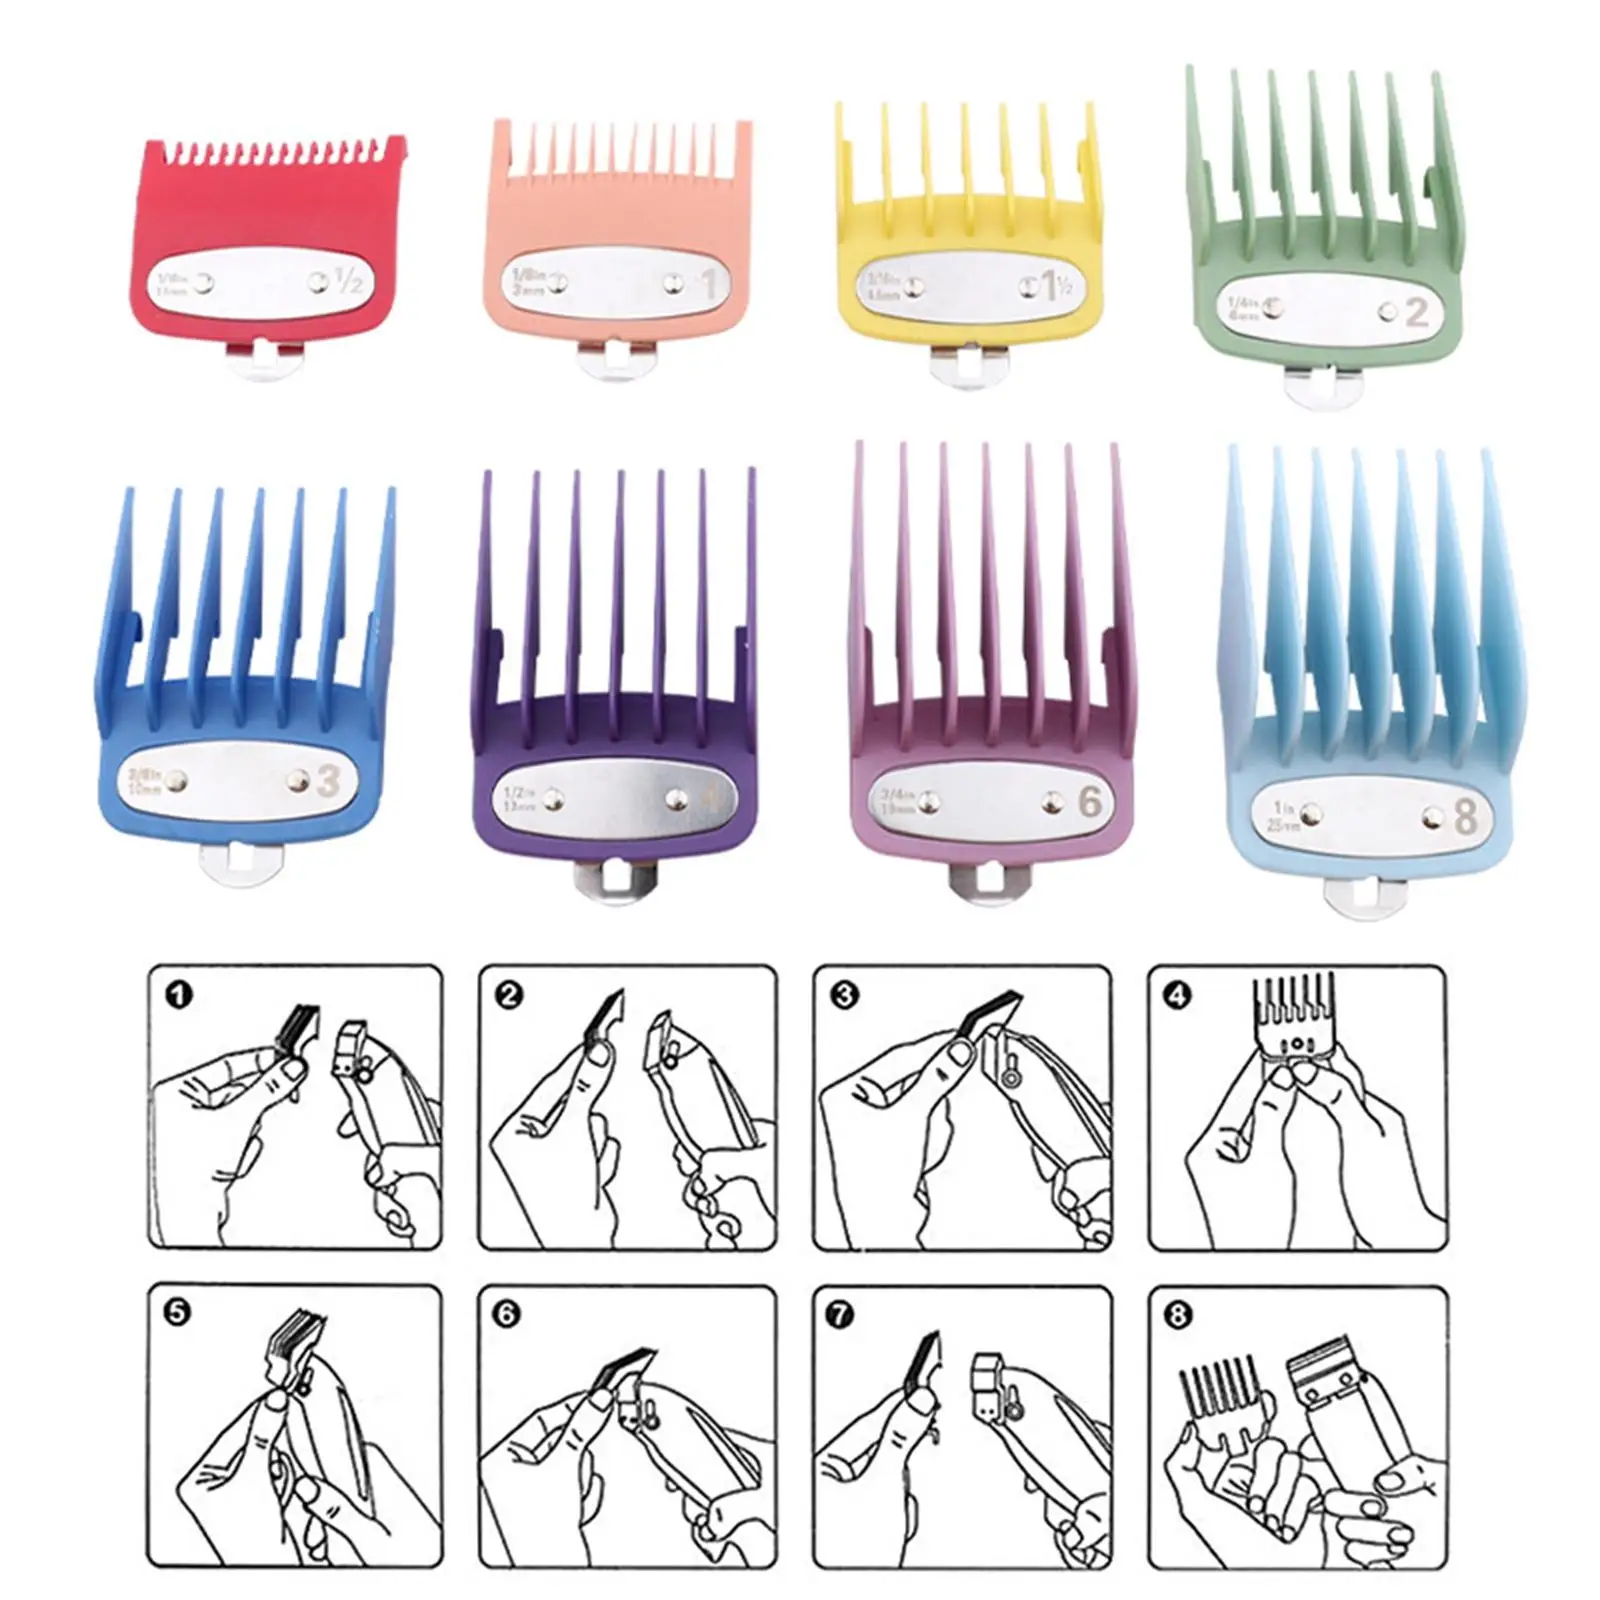 8x Hair Clipper Guards Accessories with Metal Clip Professional Hair Cutting Guide Combs Set for Wahl Clippers Trimmers Barber